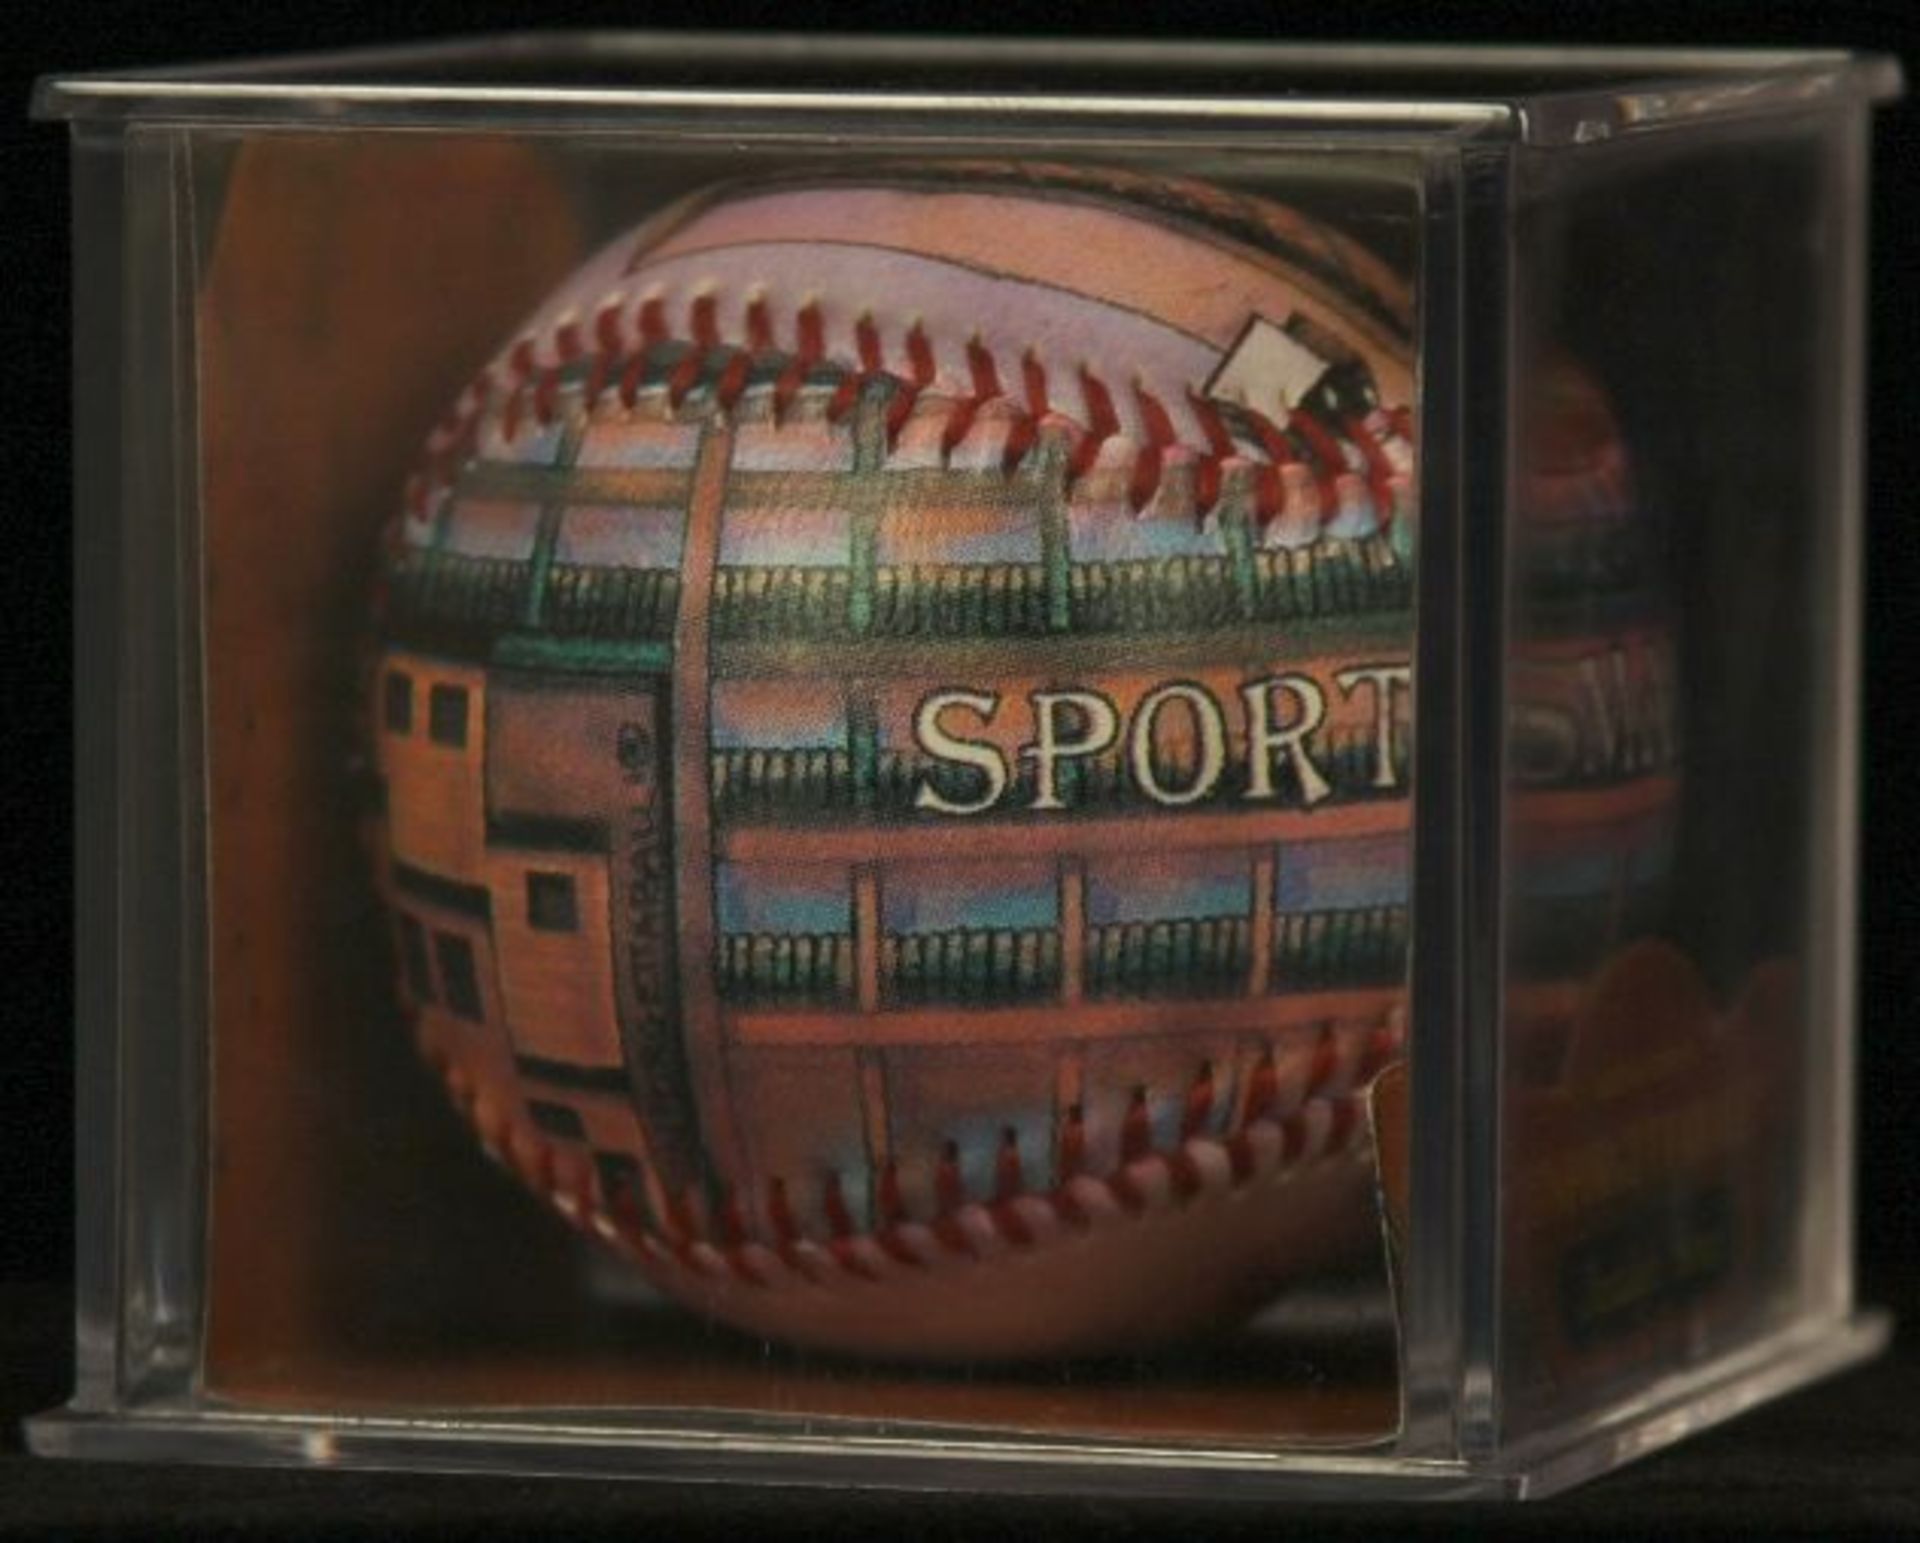 Unforgettaball! "Sportsman's Park" Nostalgia Series Collectable Baseball - Image 2 of 4